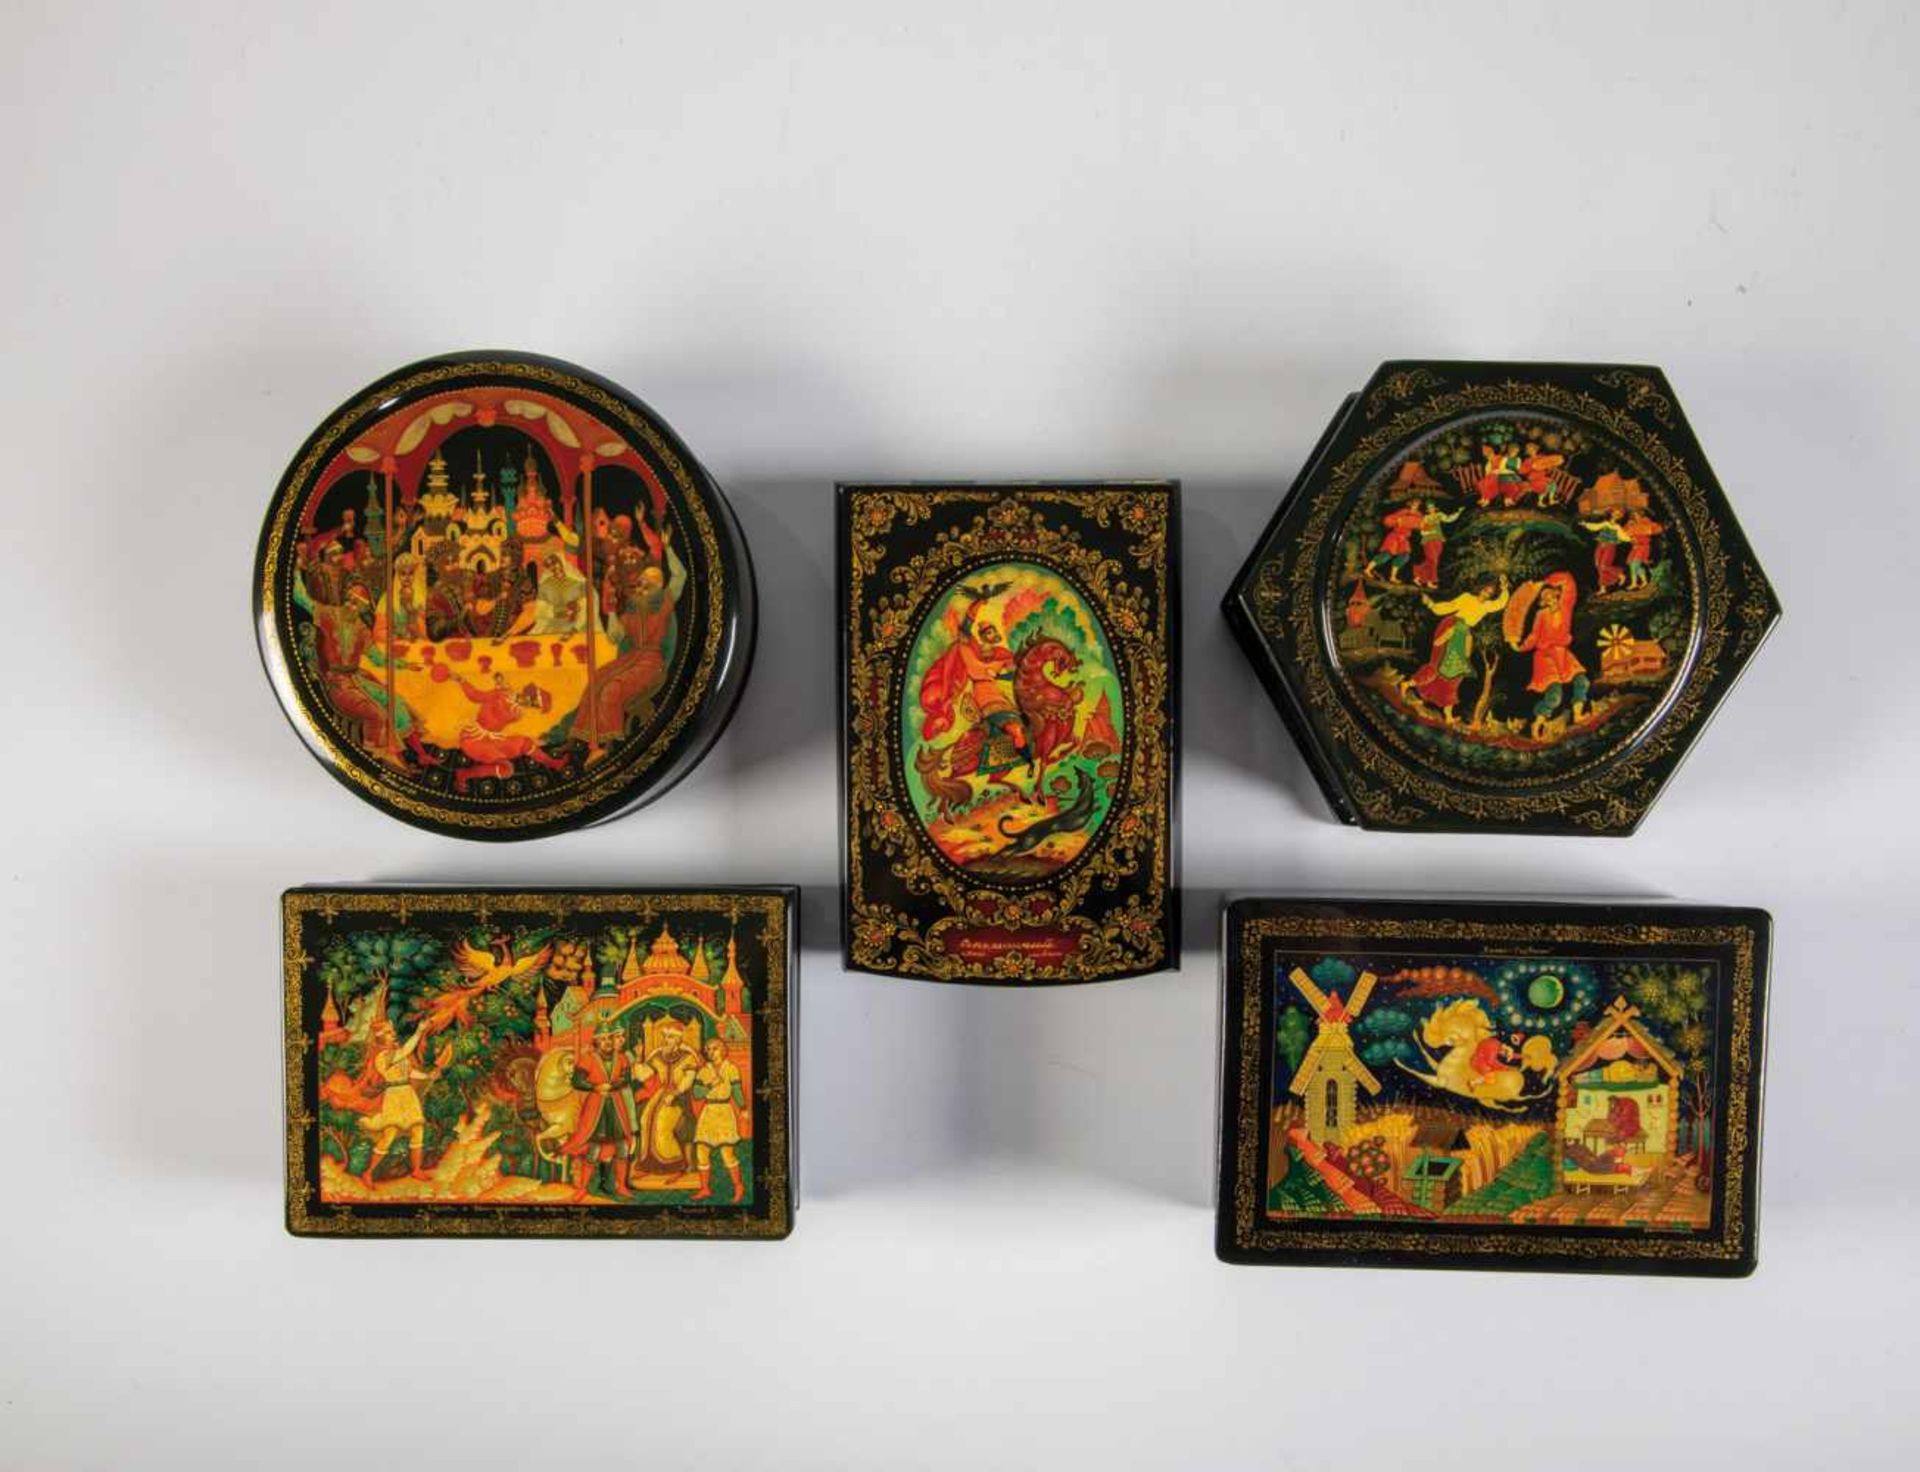 Five papier-maché and lacquer boxes. Soviet Union, Palekh (two), Kholui (two), Mstera(one), late